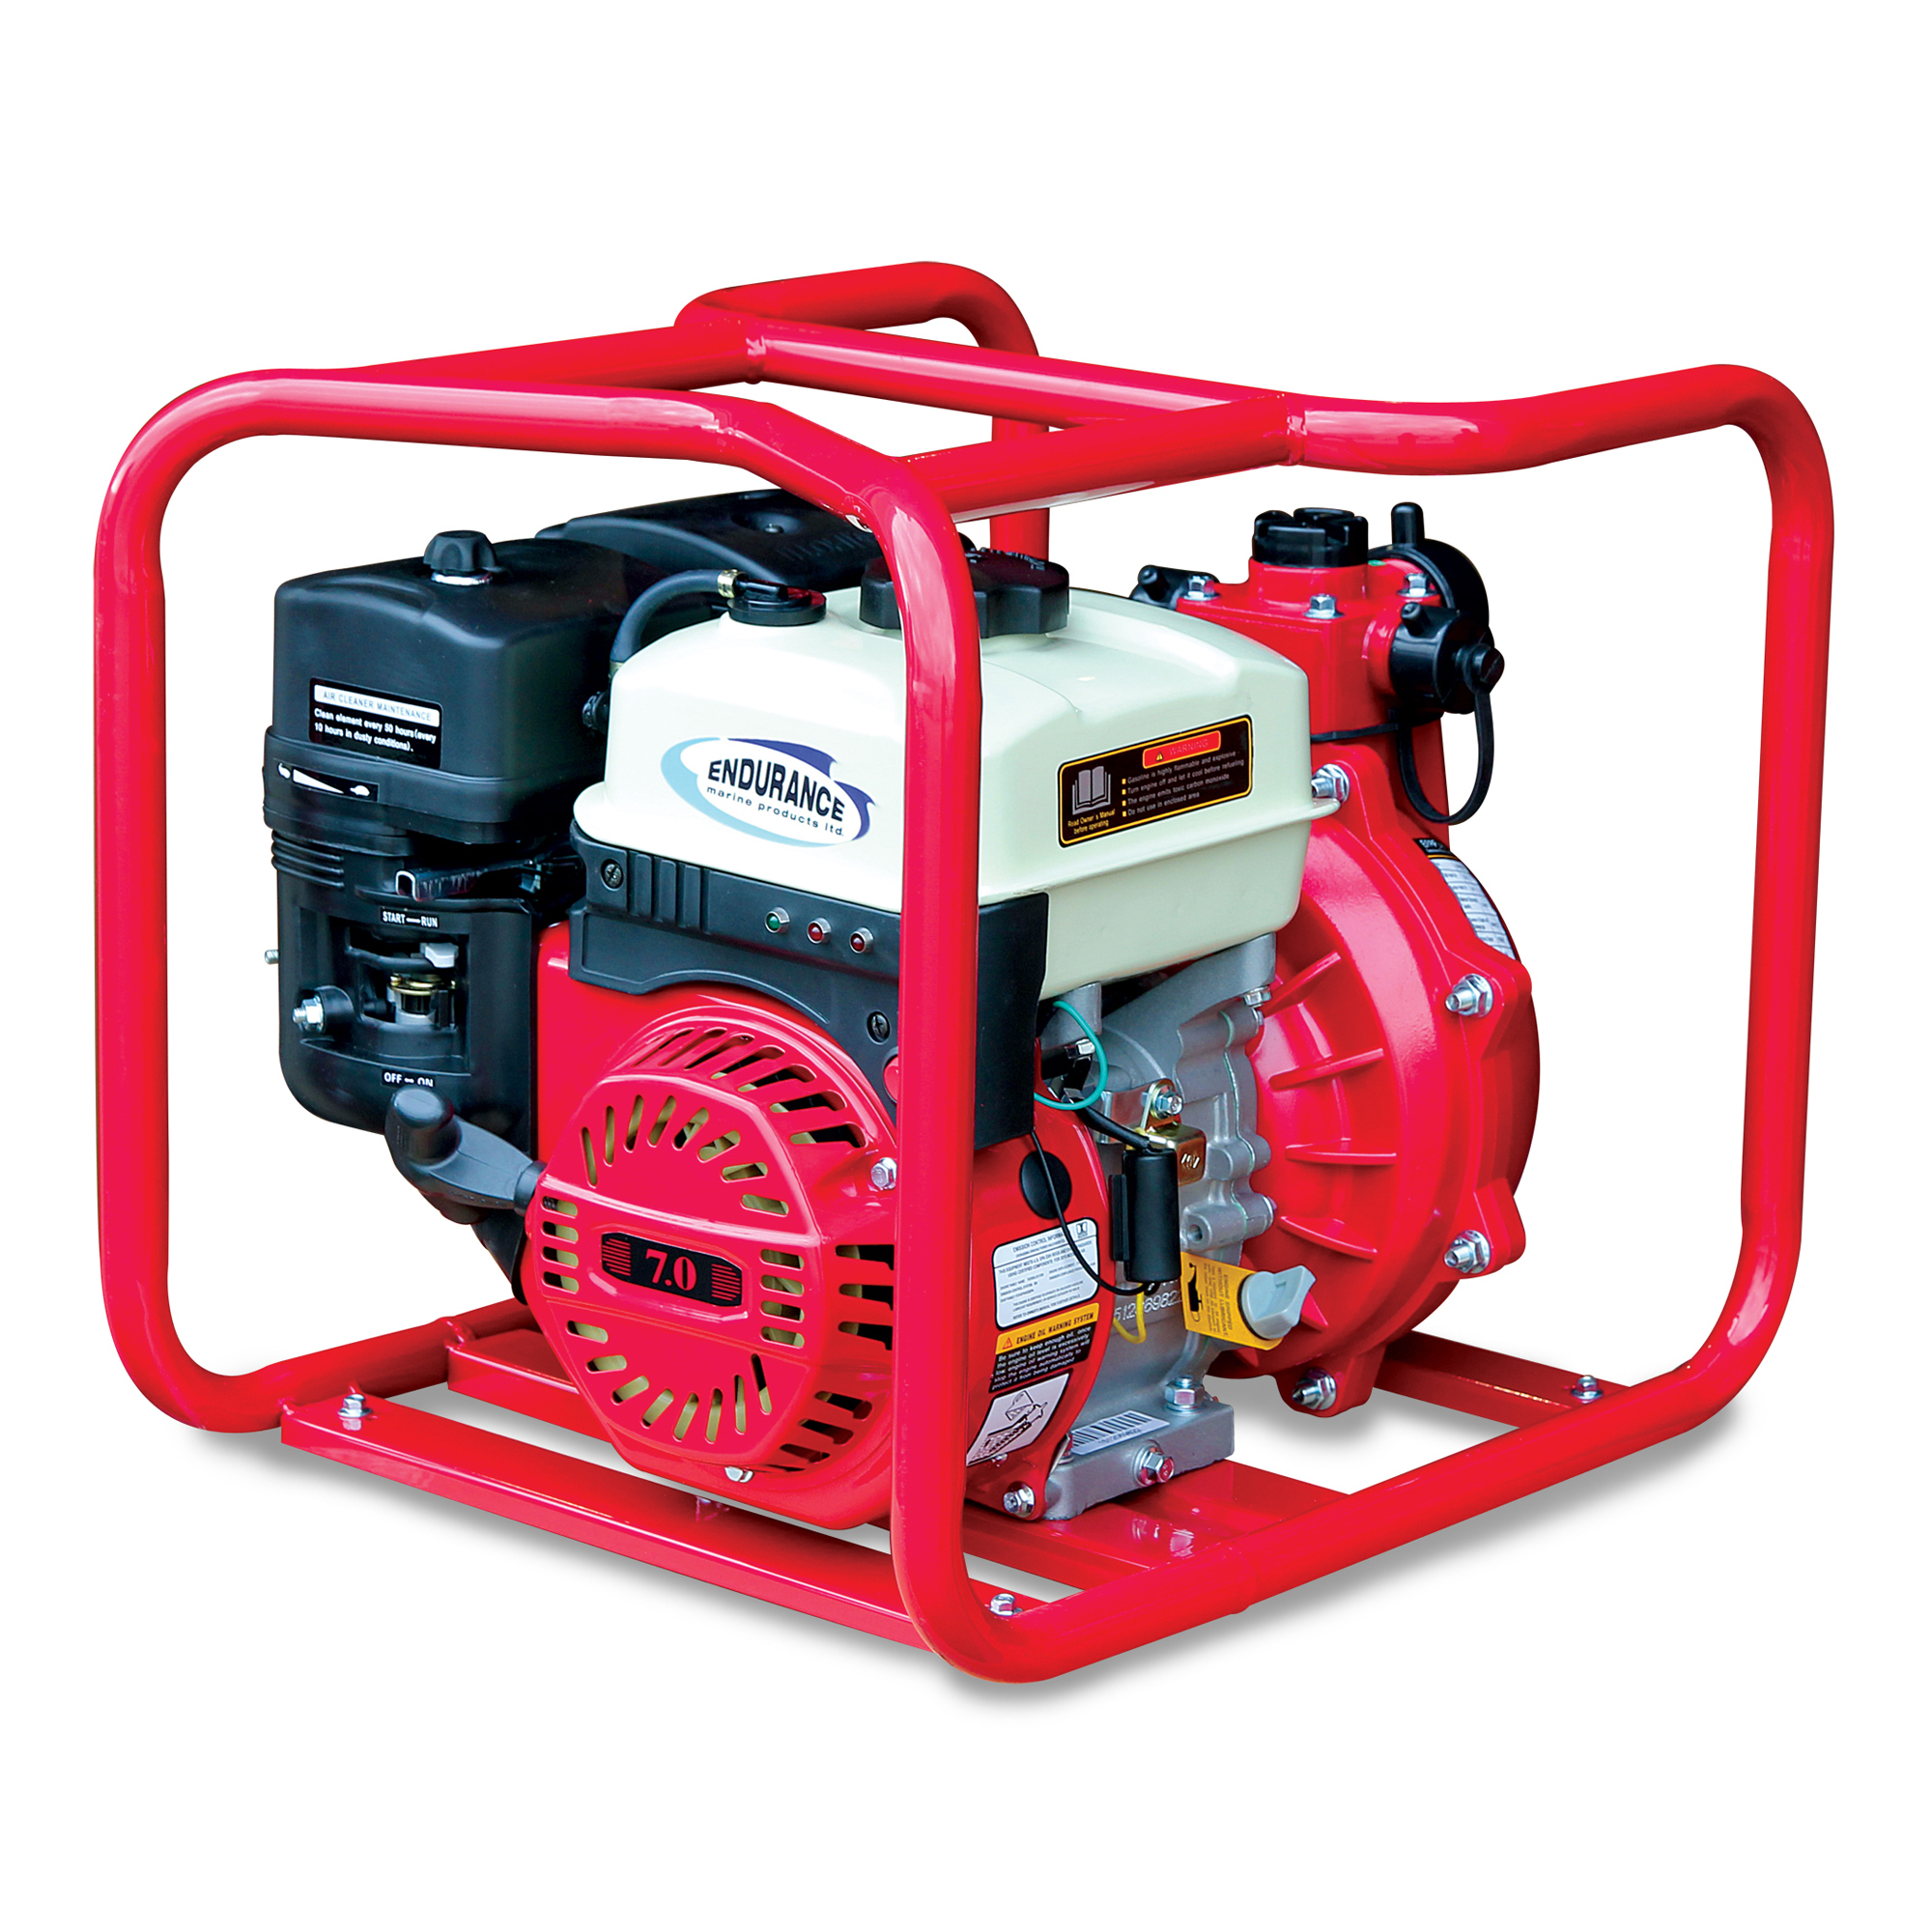 Endurance Marine High Pressure Fire Pump, Max. Flow 3600 GPH, Engine Displacement 212 cc, Port Size 1.5 in, Model EFPPEA1